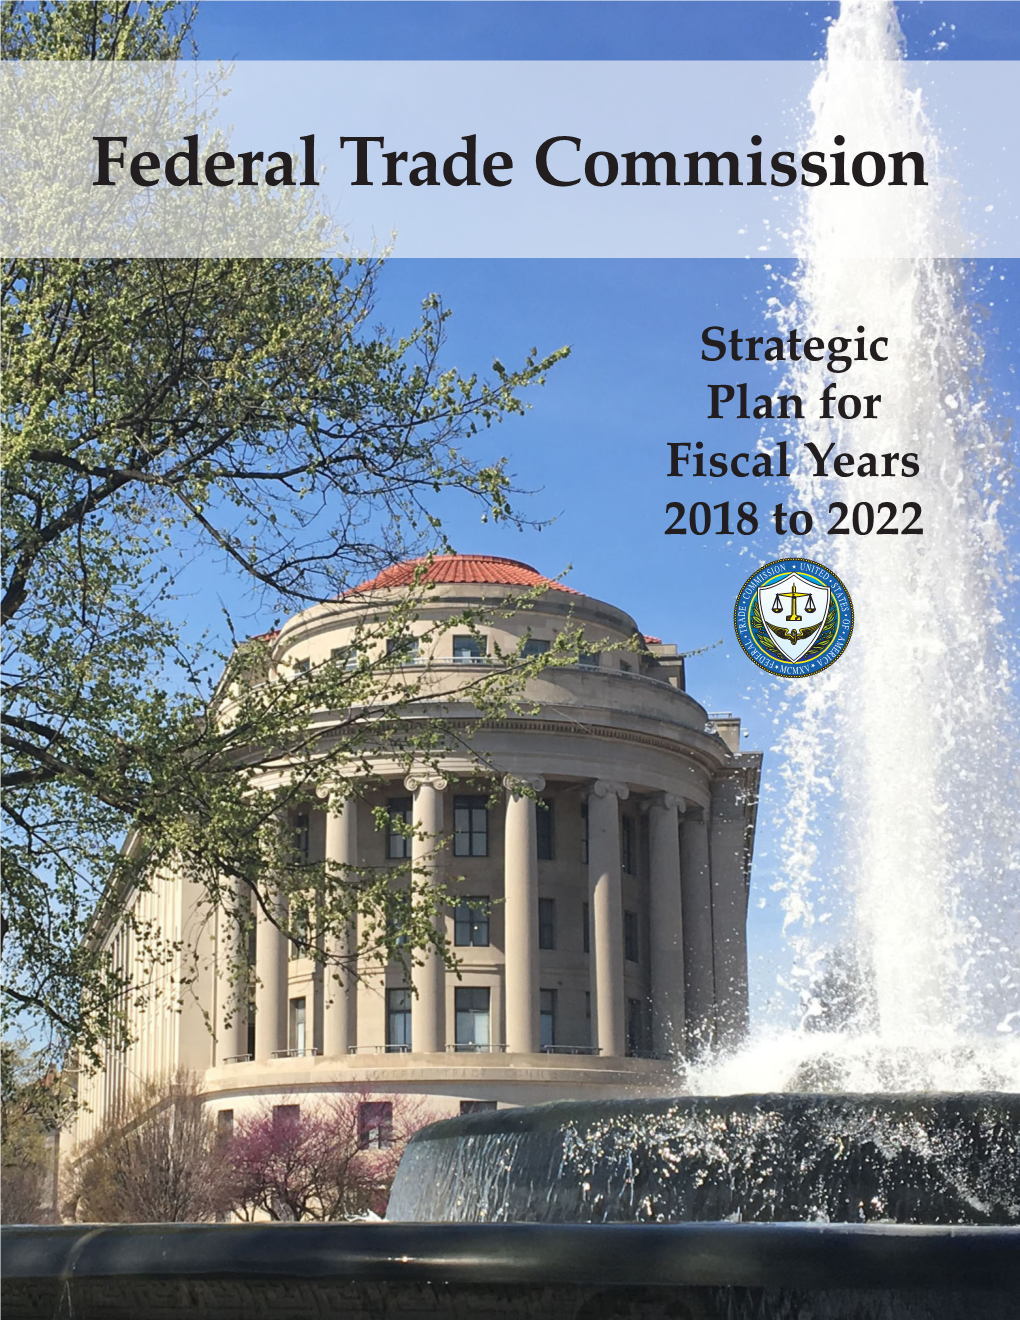 Strategic Plan for Fiscal Years 2018 to 2022 Federal Trade Commission Strategic Plan for Fiscal Years 2018 to 2022